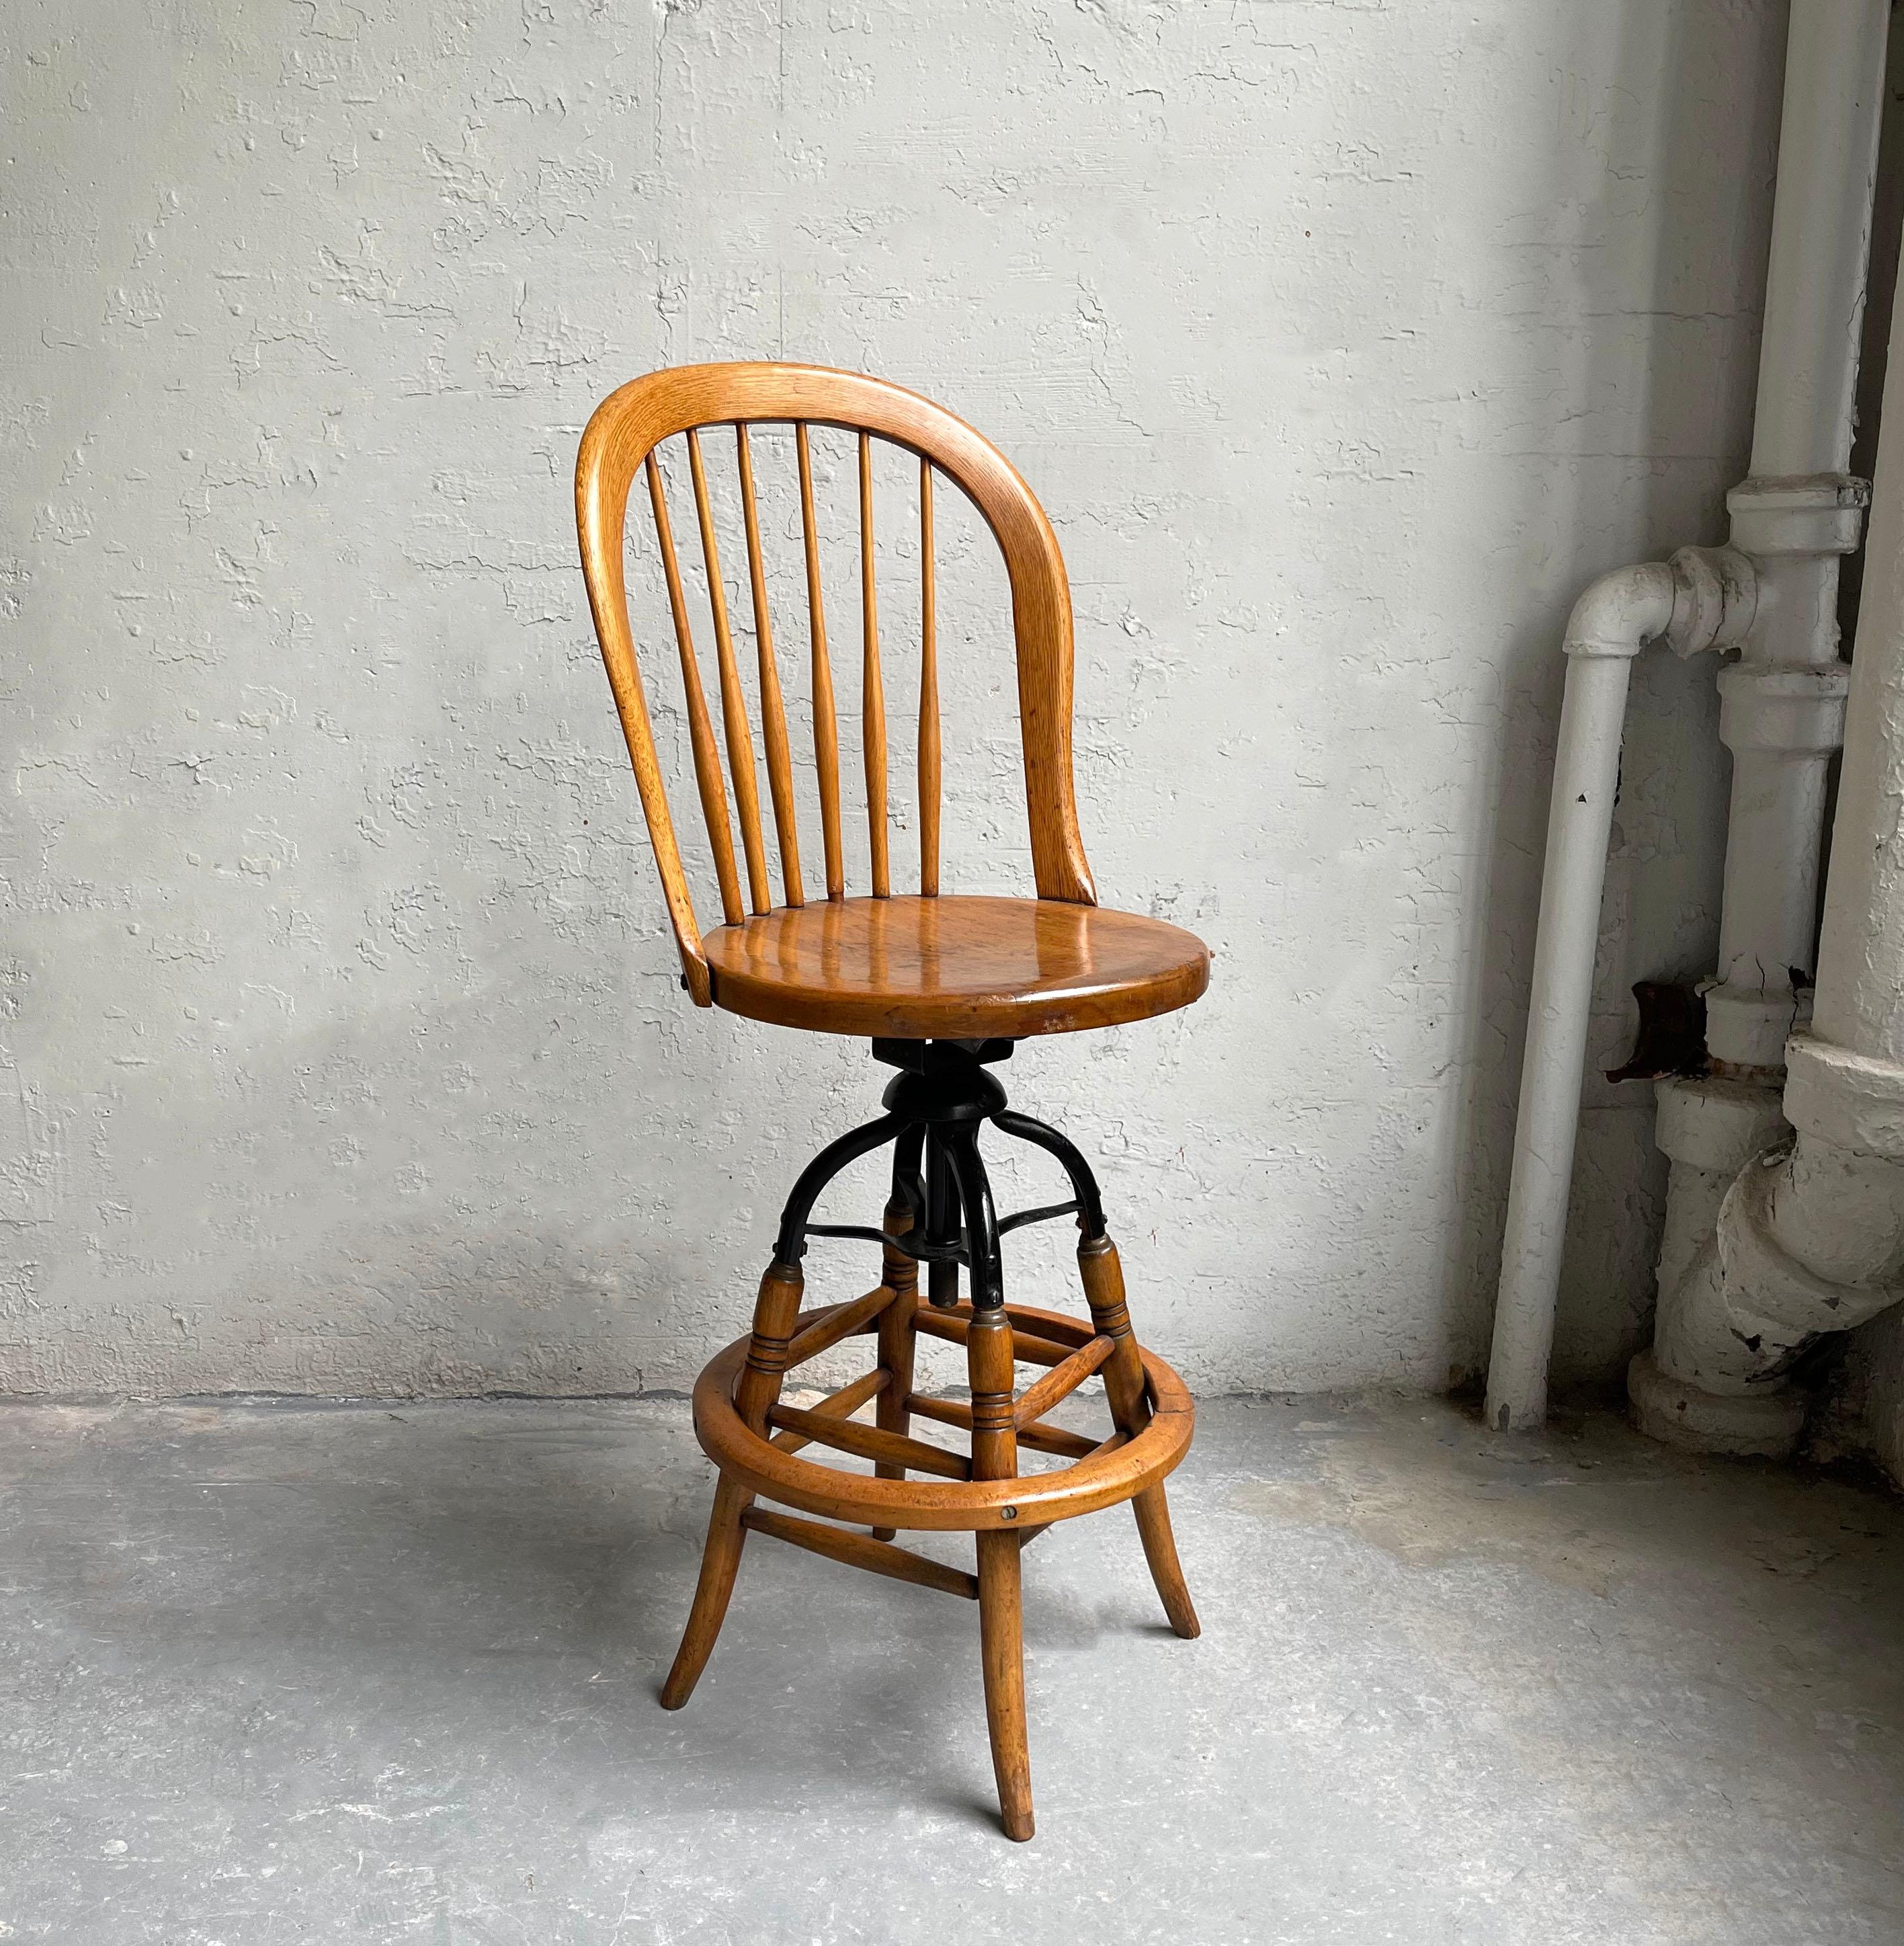 Antique, late 19th century, industrial, maple and steel, drafting stool features a sculpted spindle back with turned details on the legs. The stool is height adjustable to approx 30 inches.